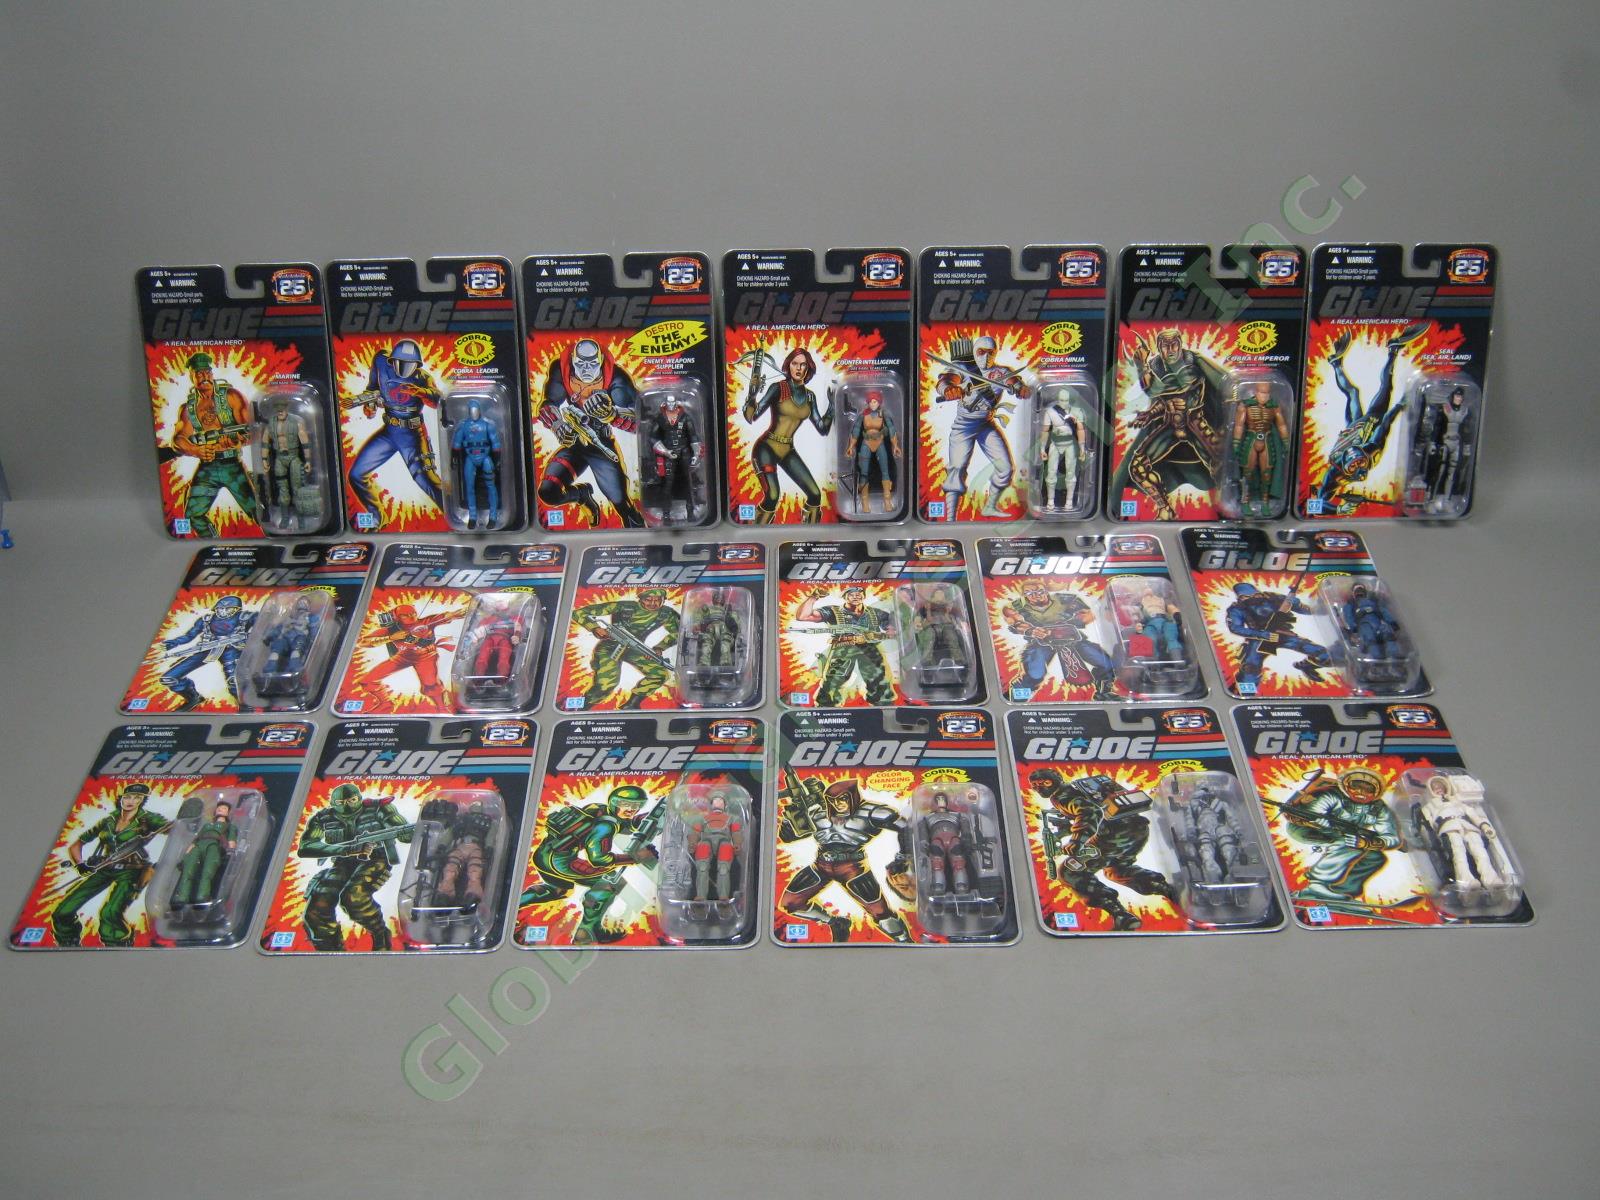 19 NOS New Sealed MOC GI Joe 25th Anniversary Carded 3-3/4" Action Figure Lot NR